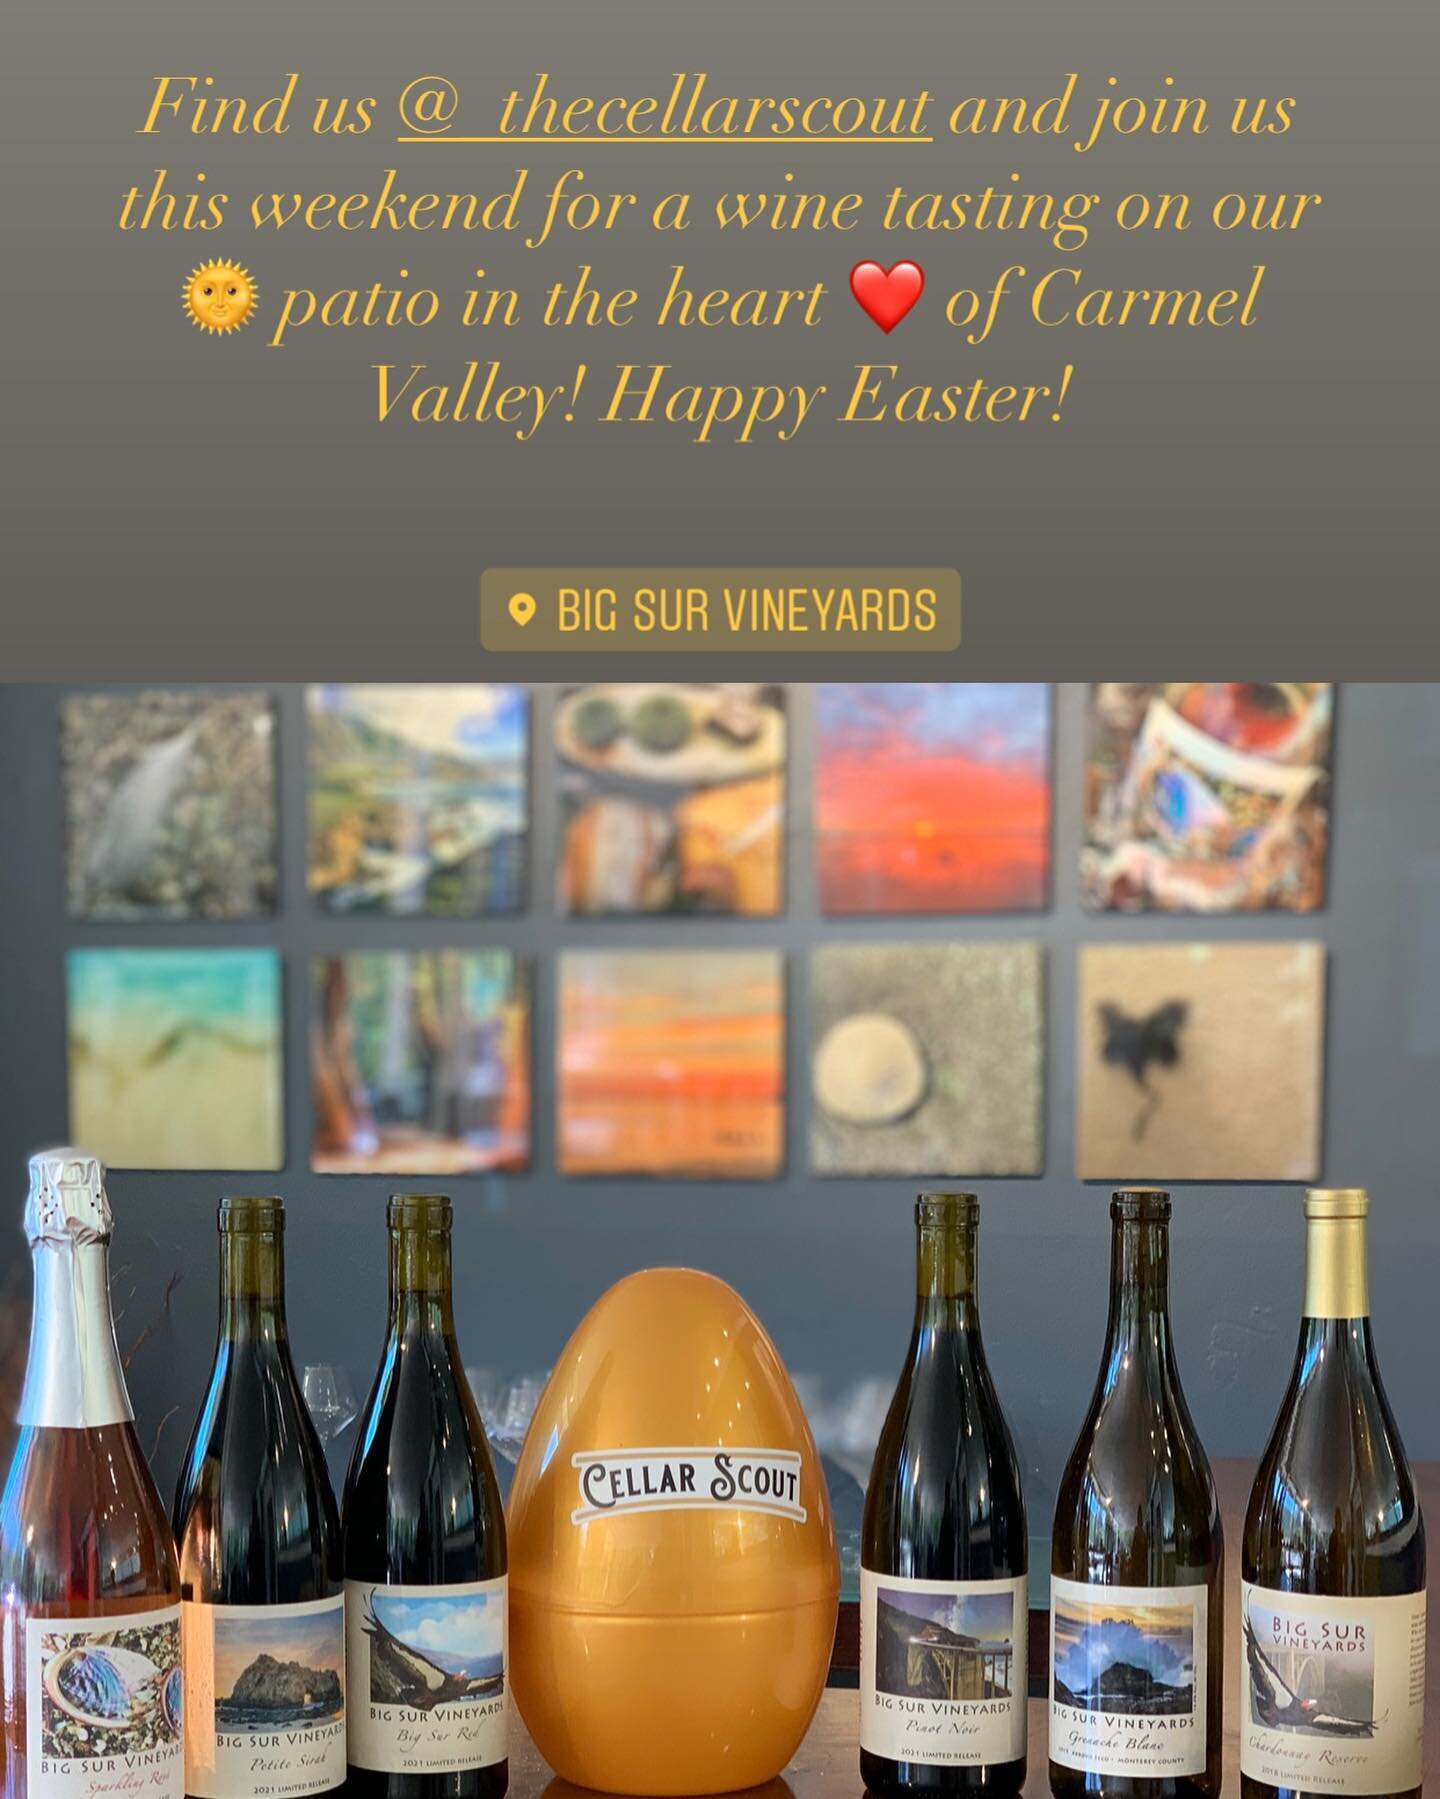 Looking forward to a fabulous Easter Weekend at Big Sur Vineyards tasting room!  Stop in for a taste of wine and see if you can find an egg or two! #happyeaster #ros&egrave; #sparklingwine #winetasting #wineclubmemberforaday #easteregghunt #thecellar